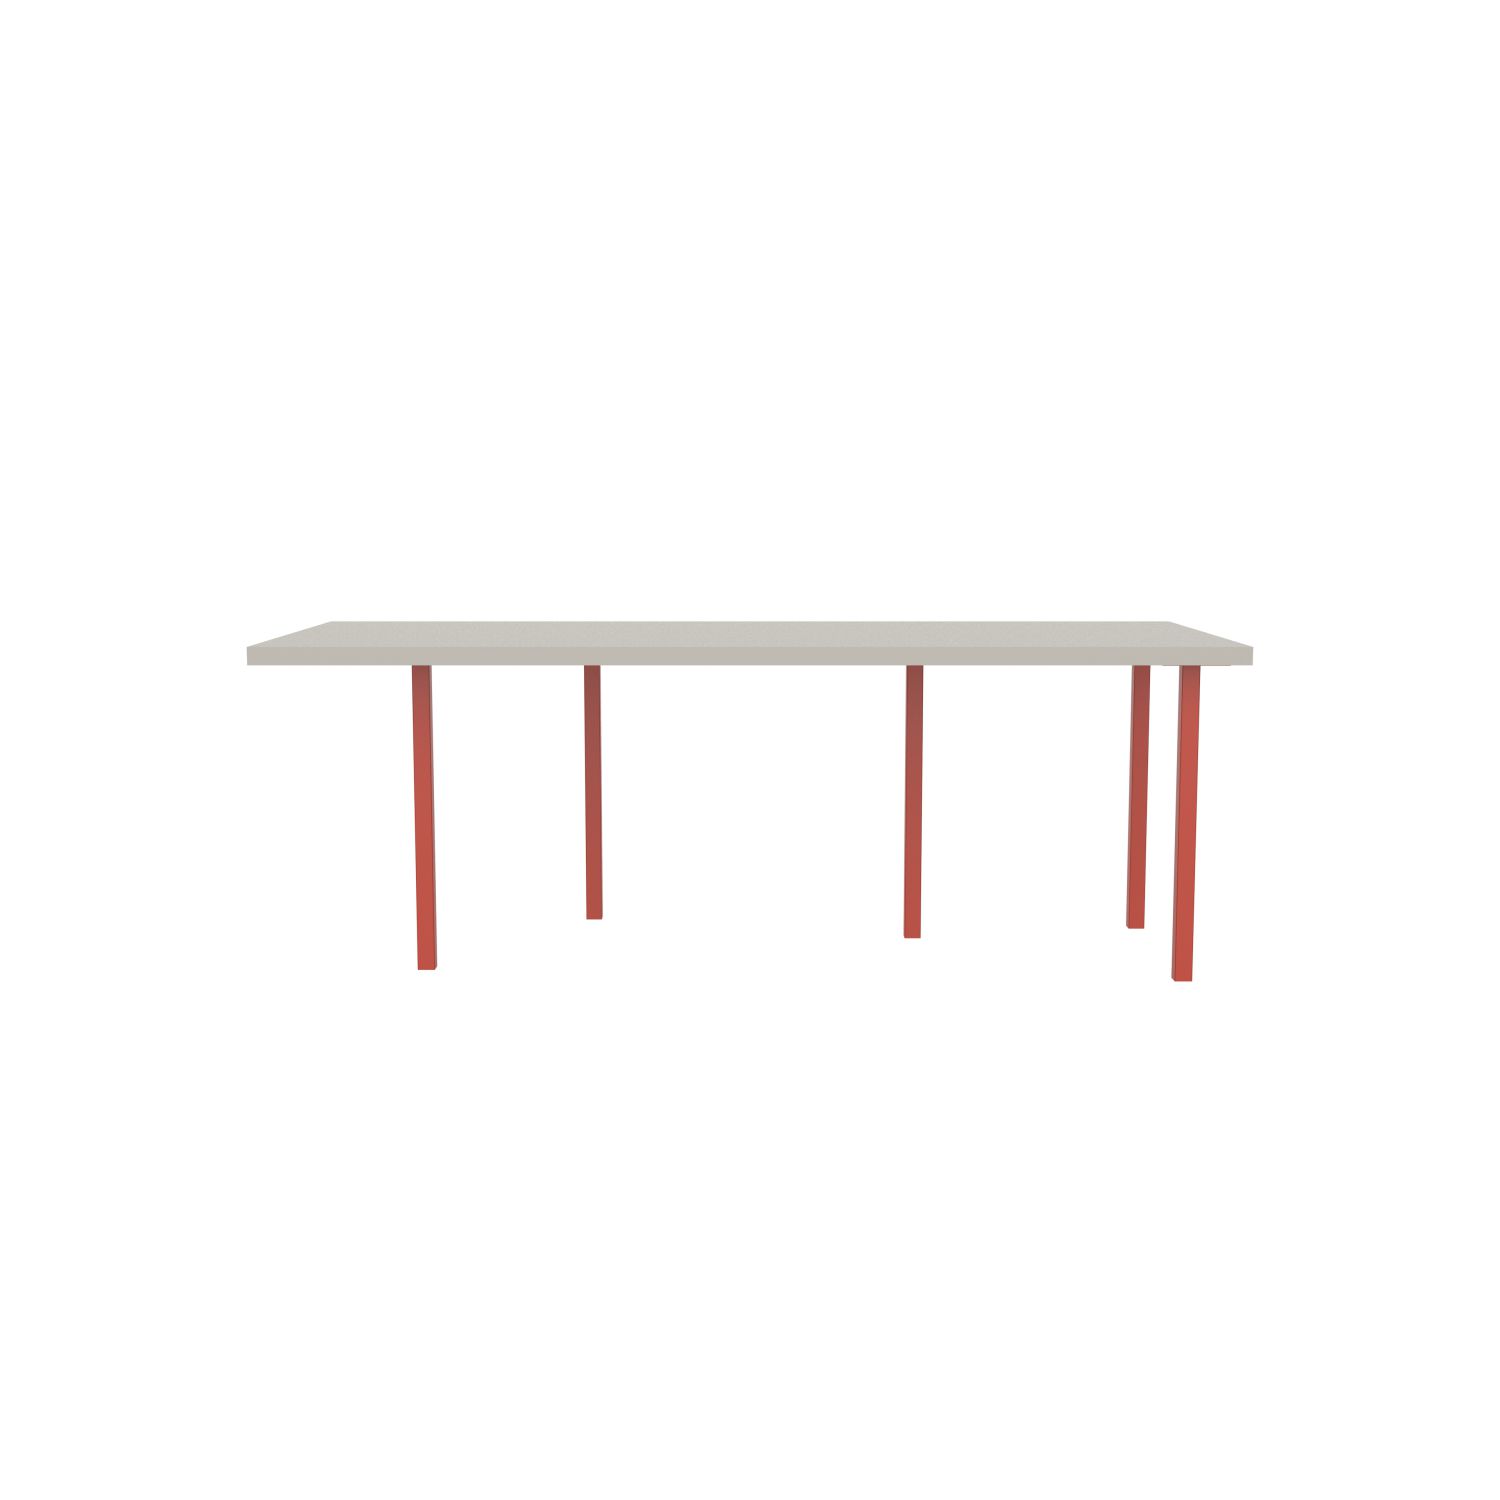 lensvelt bbrand table five fixed heigt 915x218 hpl white 50 mm price level 1 vermilion red ral2002